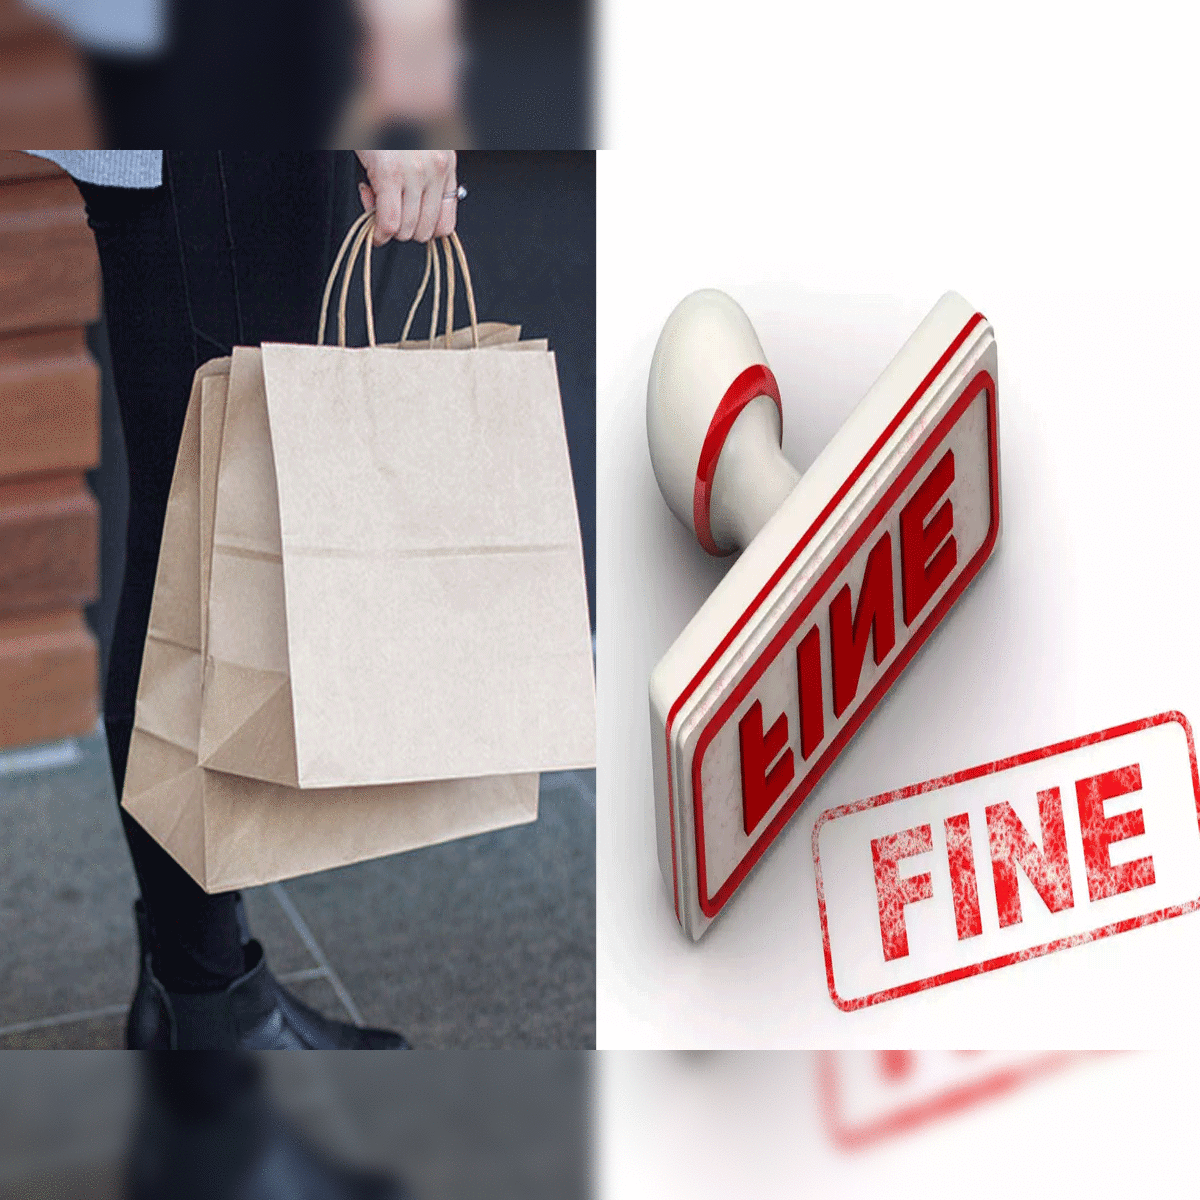 carry bag: Why retail stores still charge customers for carry bags